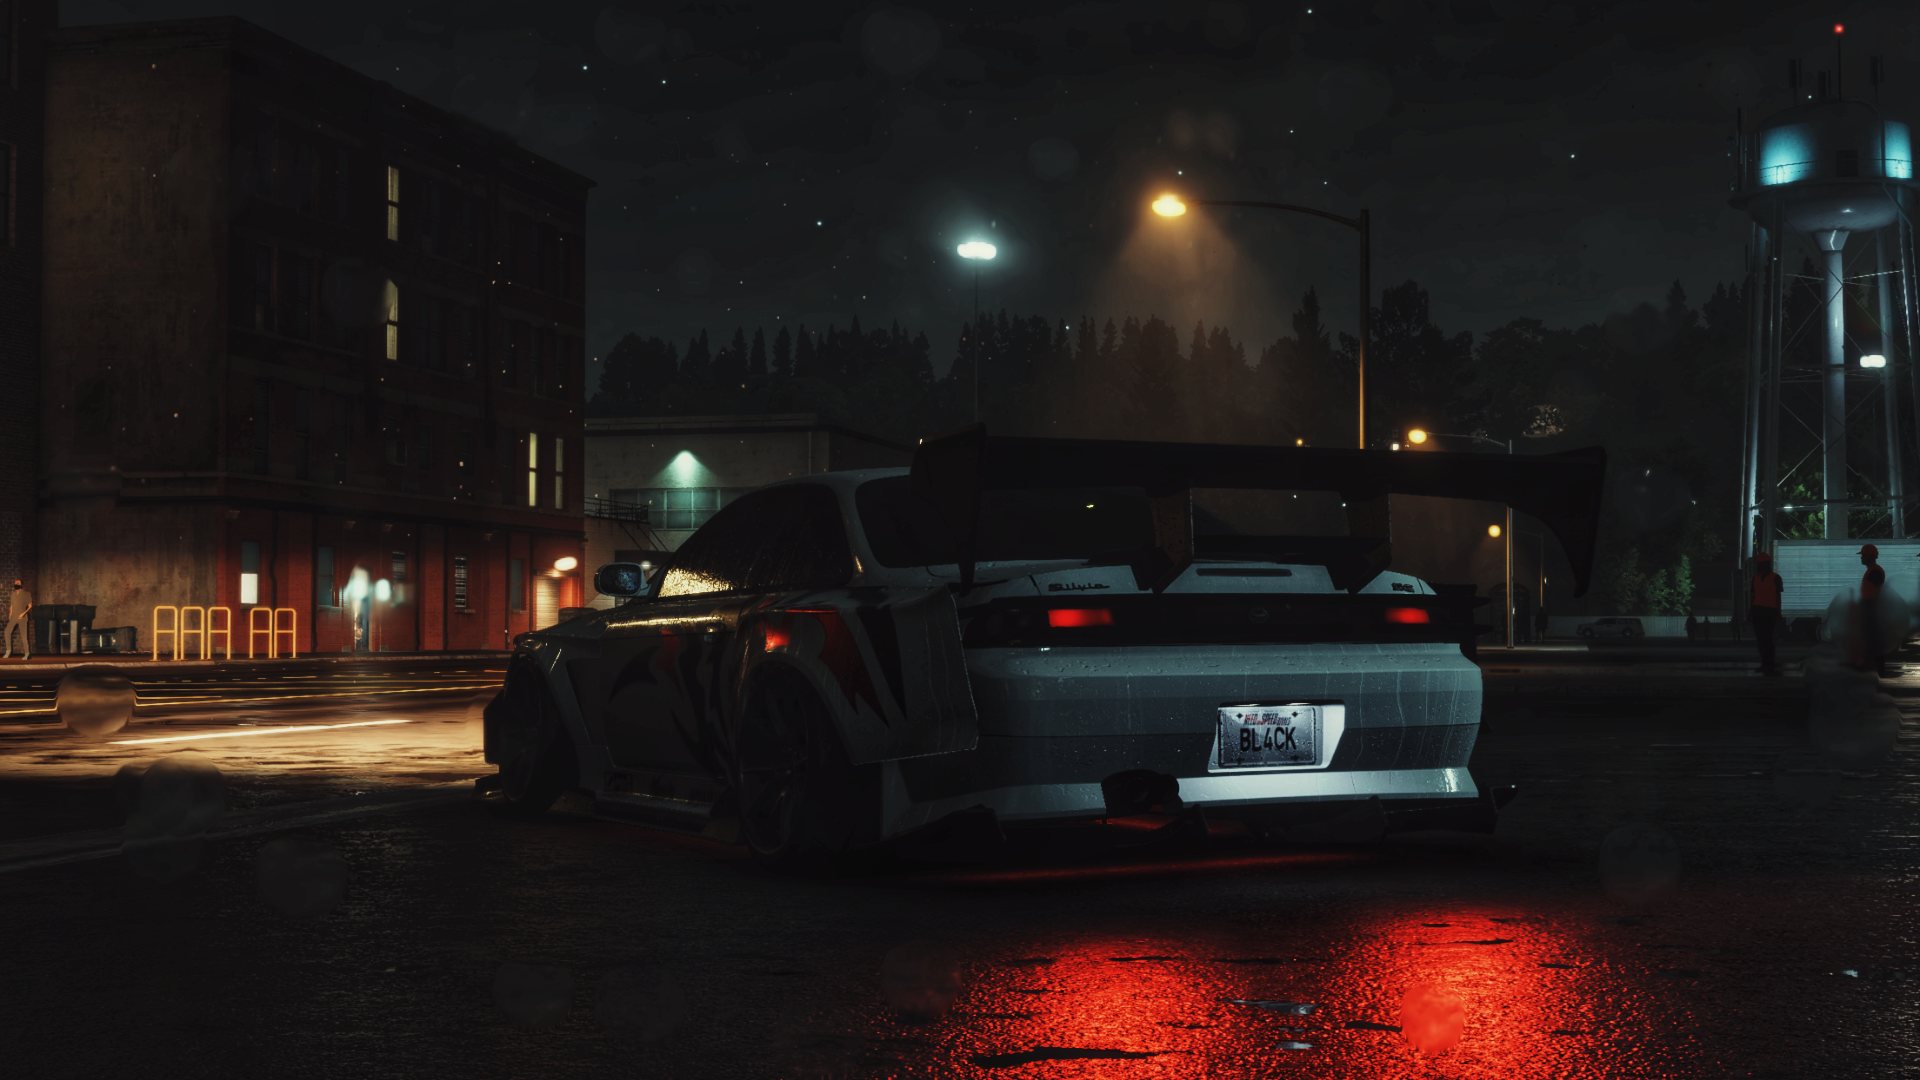 General 1920x1080 Need for speed Unbound Need for Speed edit CGI race cars car park car 4K gaming video game characters effects video games EA Games Criterion Games night taillights street light lights